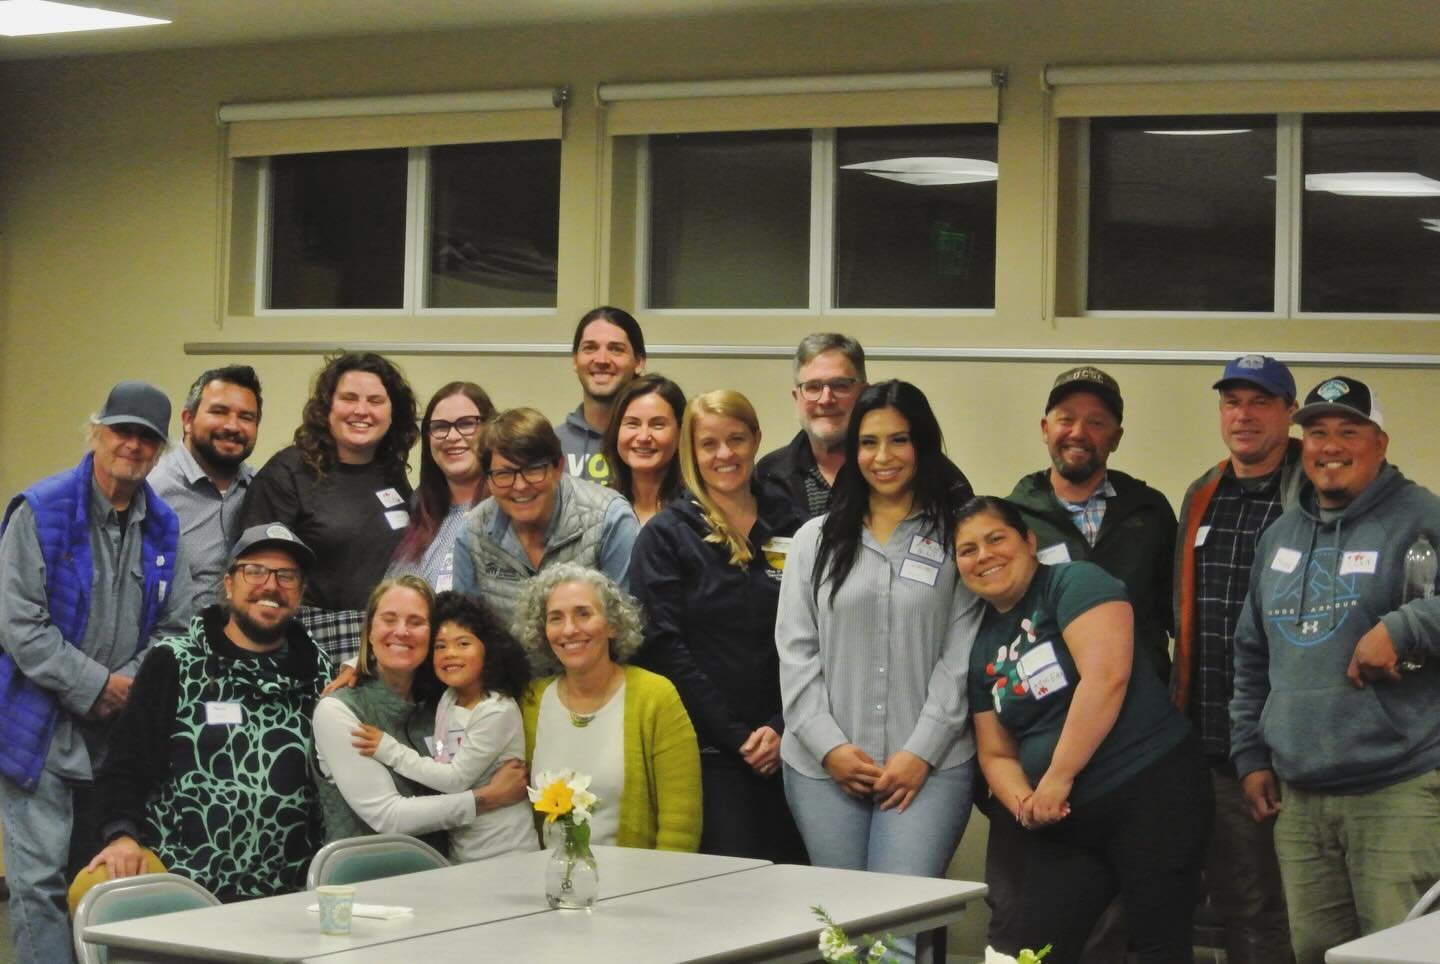 Thank you to all the community members and speakers who participated in our BCLT Community Update event! 

The strength of community lies in our relationships, and we were so grateful for the opportunity to fortify existing relationships and create n